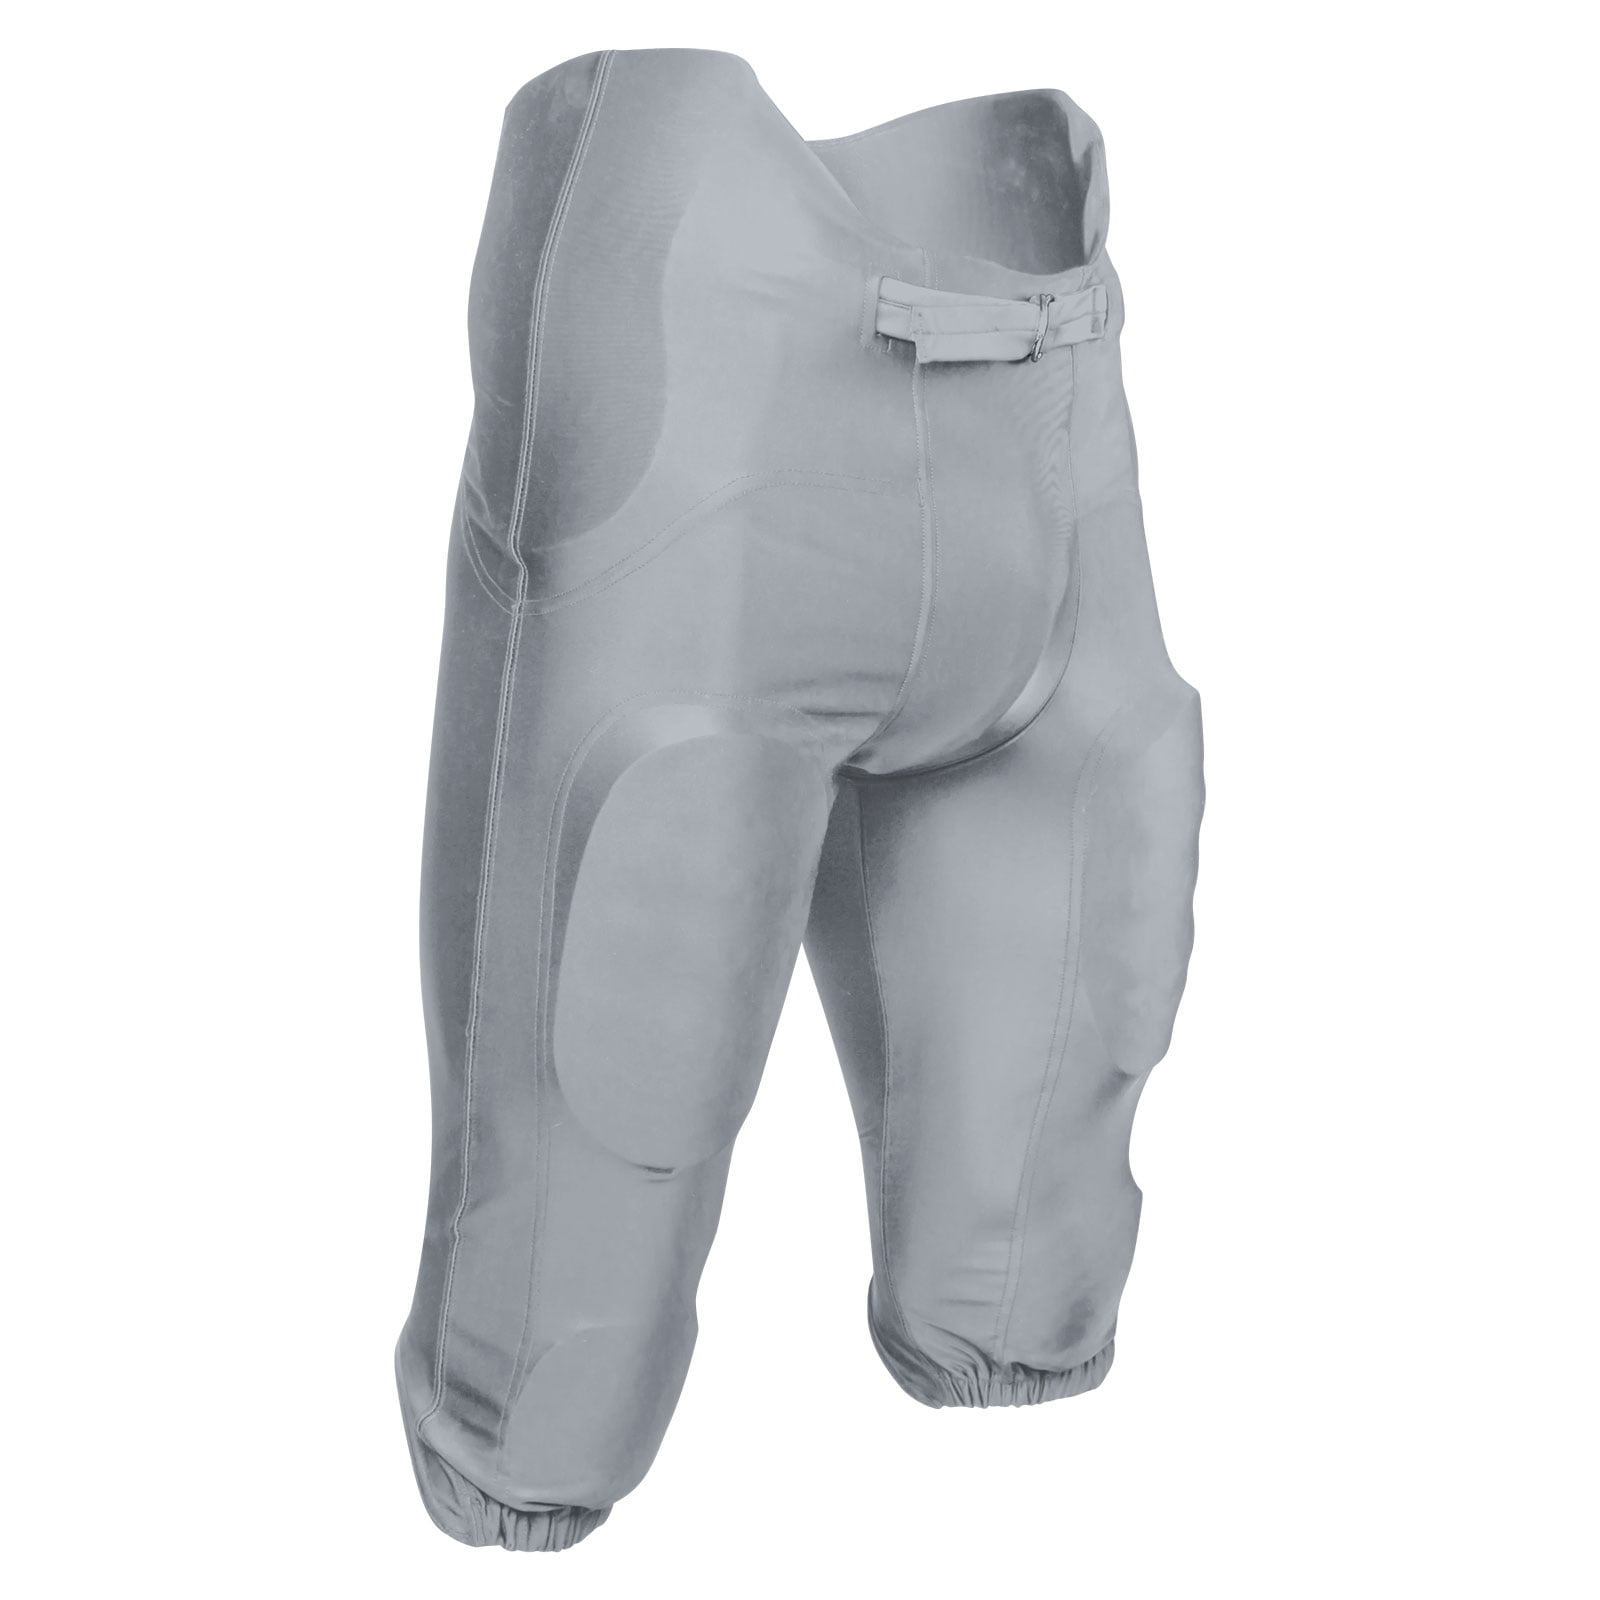 CHAMPRO Boys' Bootleg 2 Integrated Youth Football Pants with Built-in Pads 